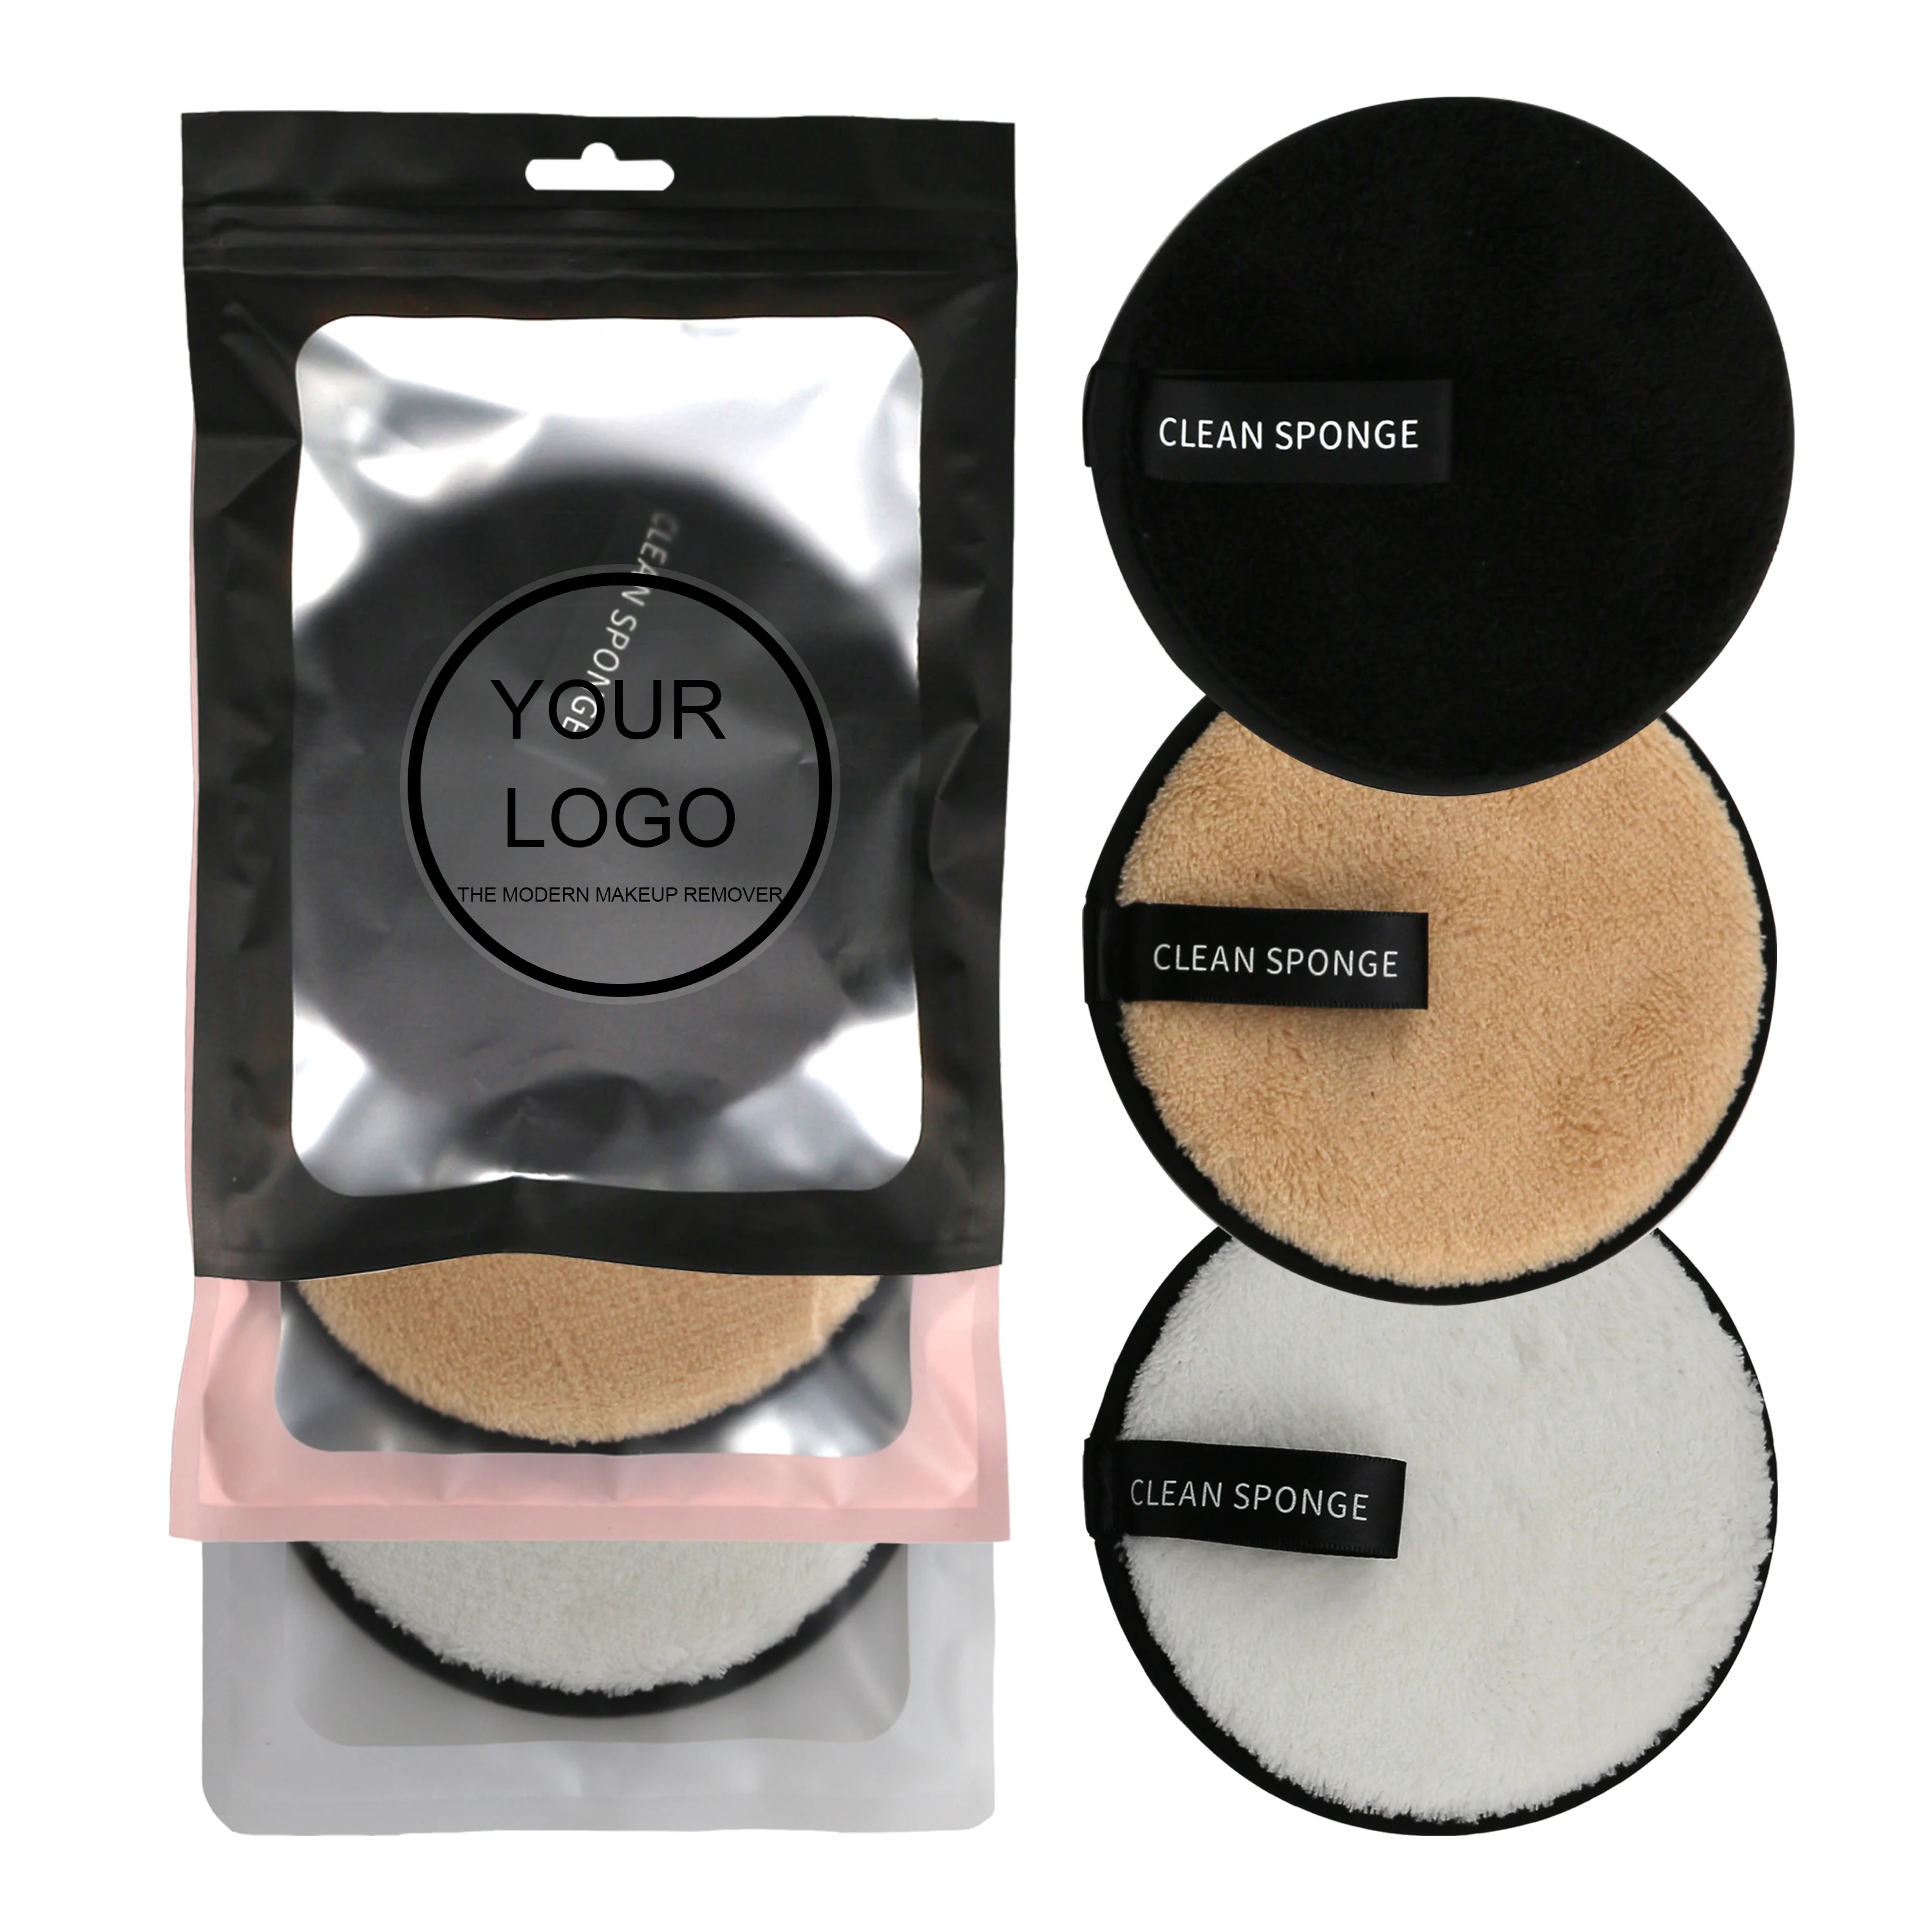 

Private Label Reusable Extra-Softness Microfiber Cotton Face Cleansing Makeup Powder Magic Remover Wipes makeup remover pads, White nude black